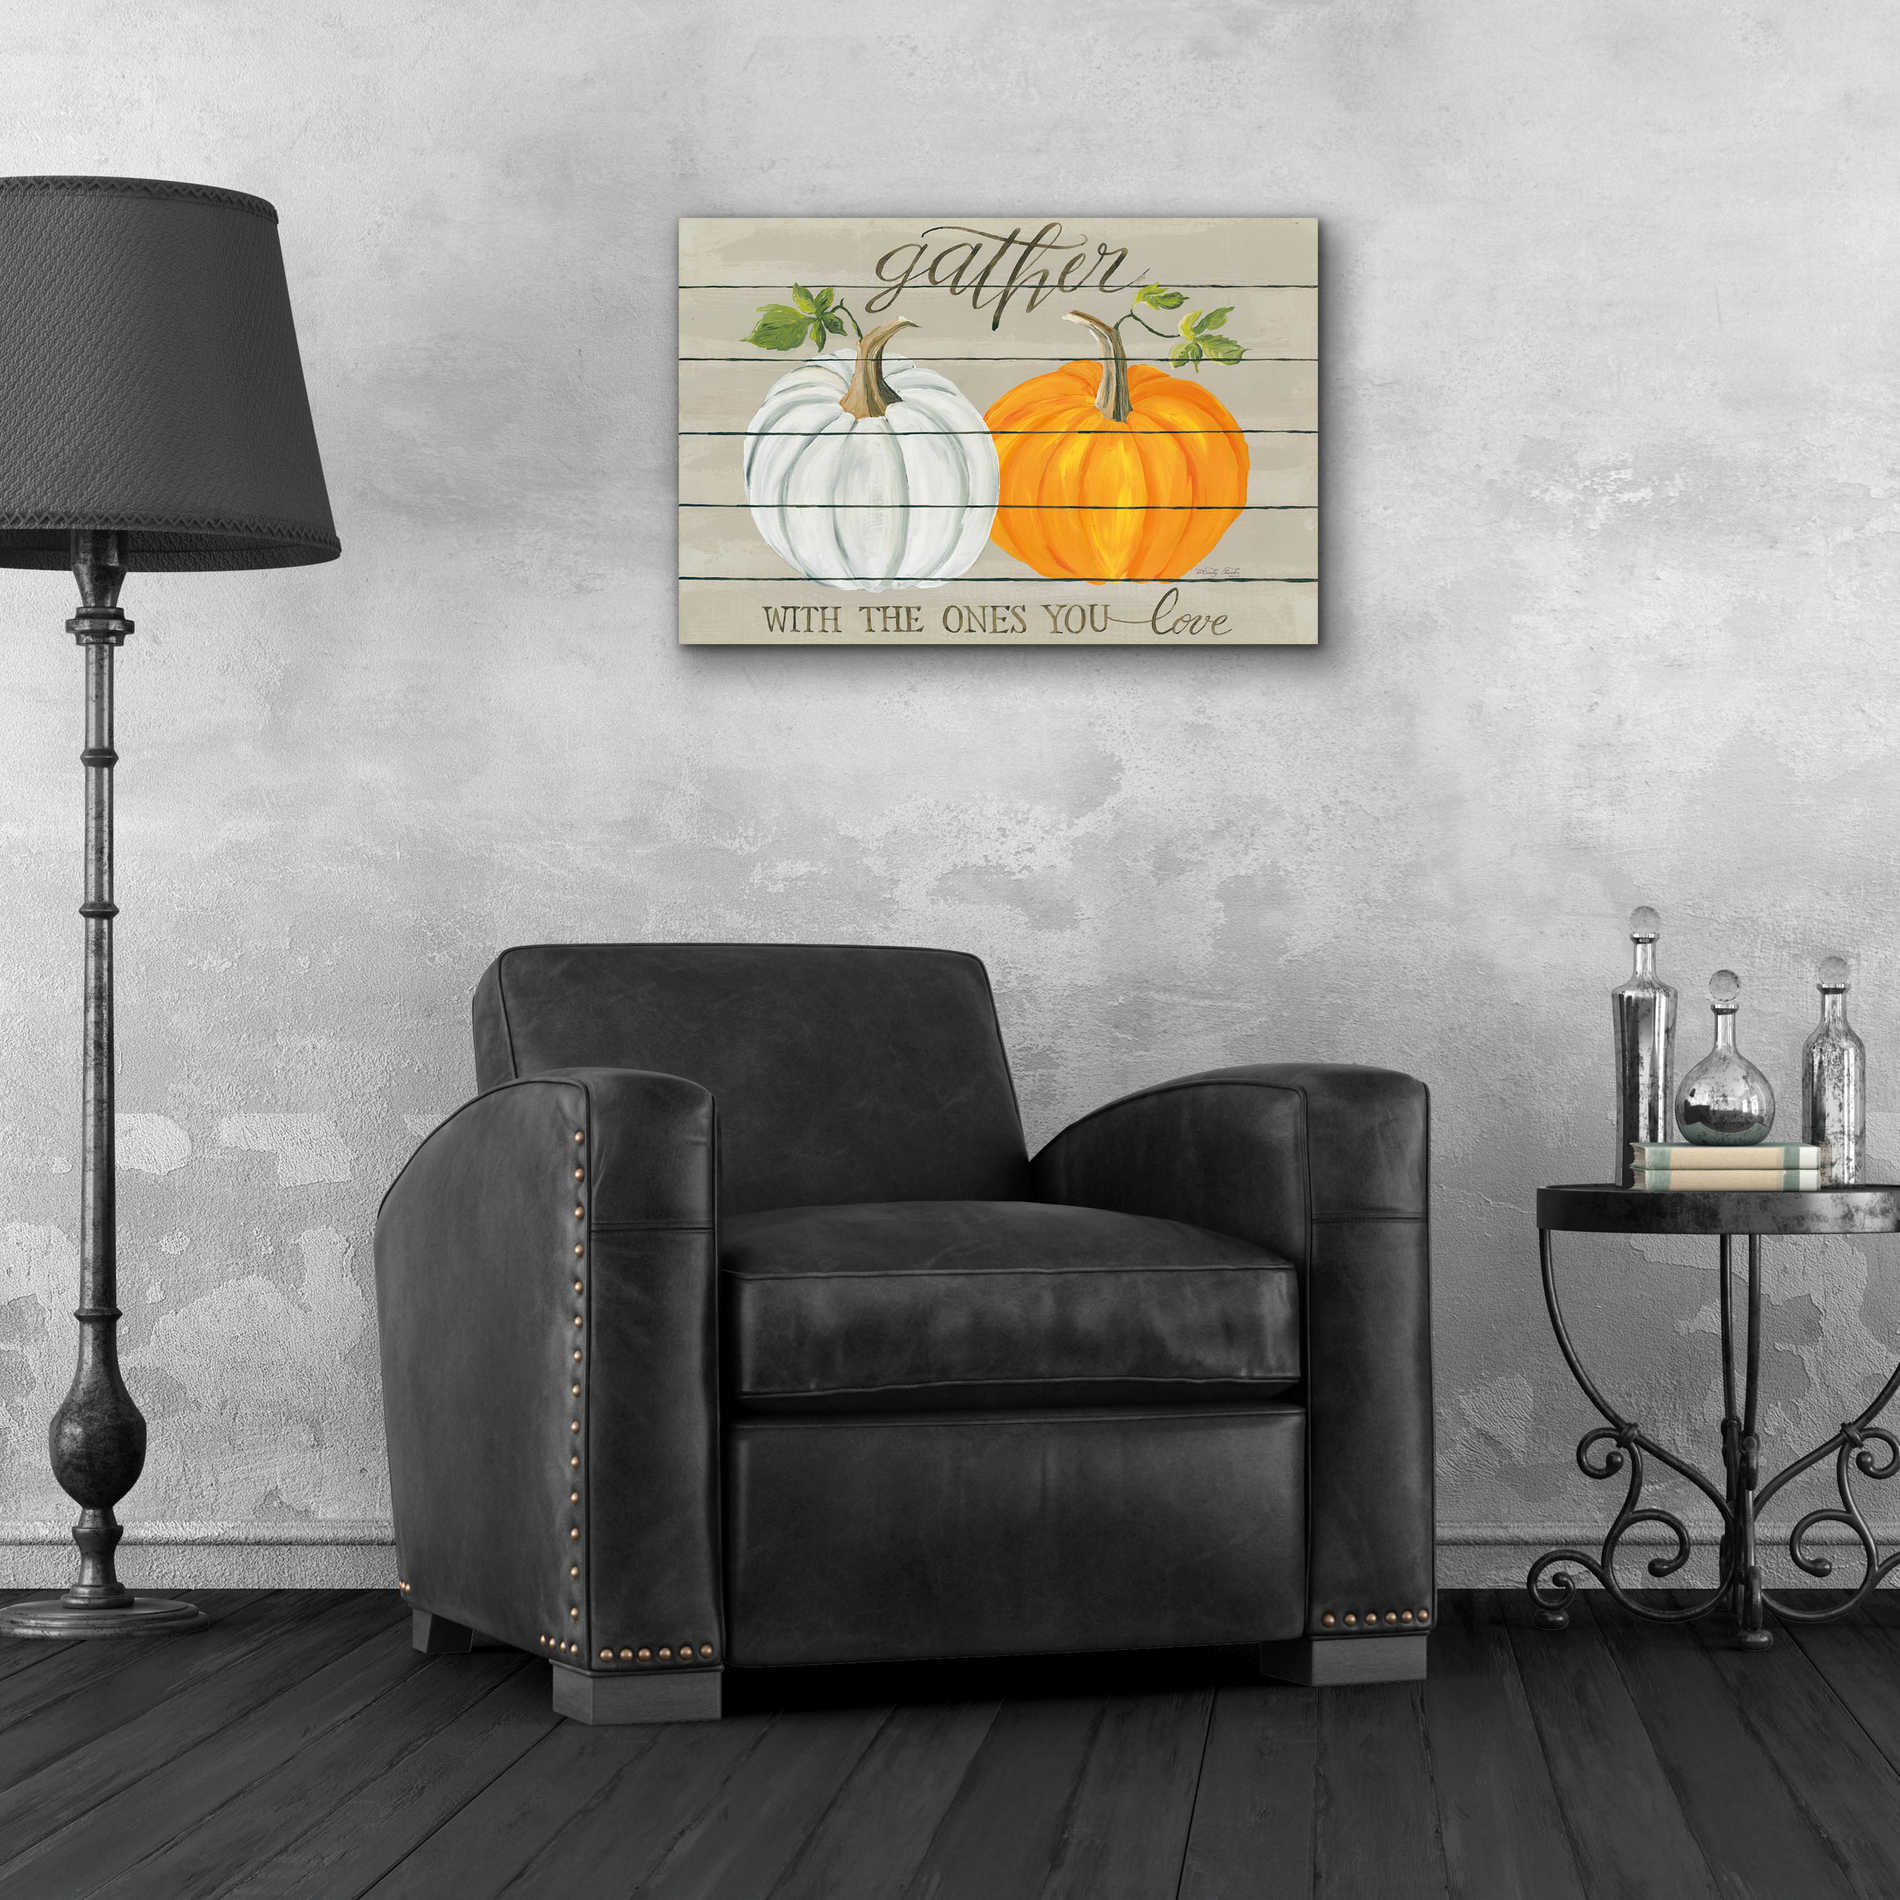 Epic Art 'Gather With The Ones You Love Pumpkins' by Cindy Jacobs, Acrylic Glass Wall Art,24x16